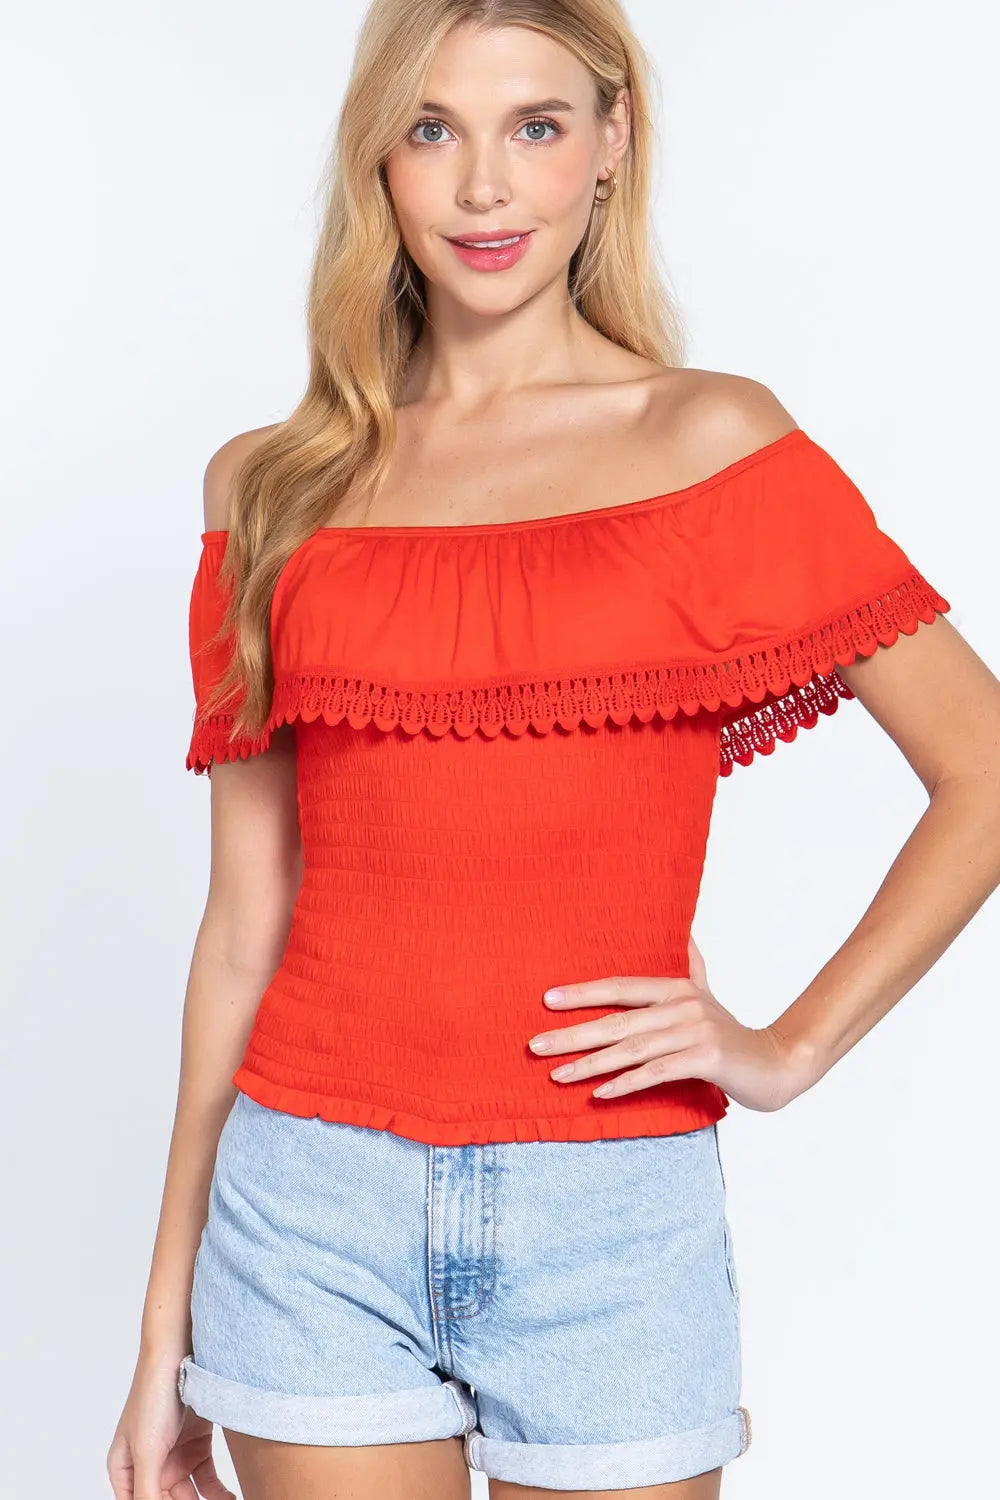 Off Shoulder W/lace Smocked Top Sunny EvE Fashion